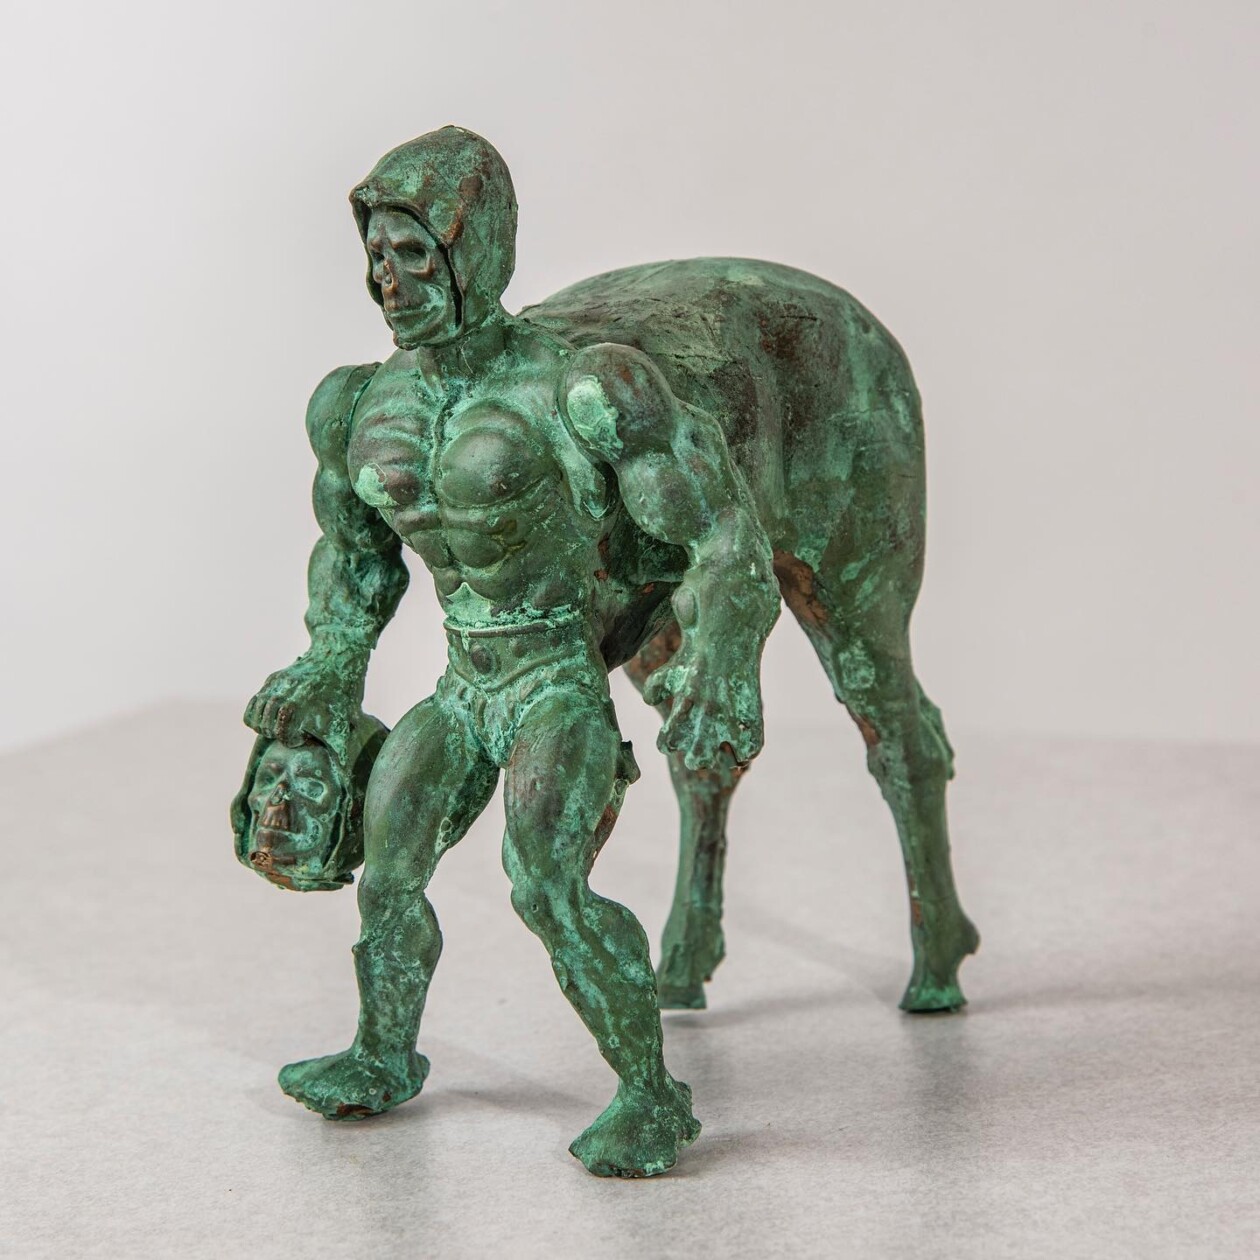 Joshua Goode Blends Ancient Relics With Pop Culture Icons In His Anachronistic Sculptures (3)